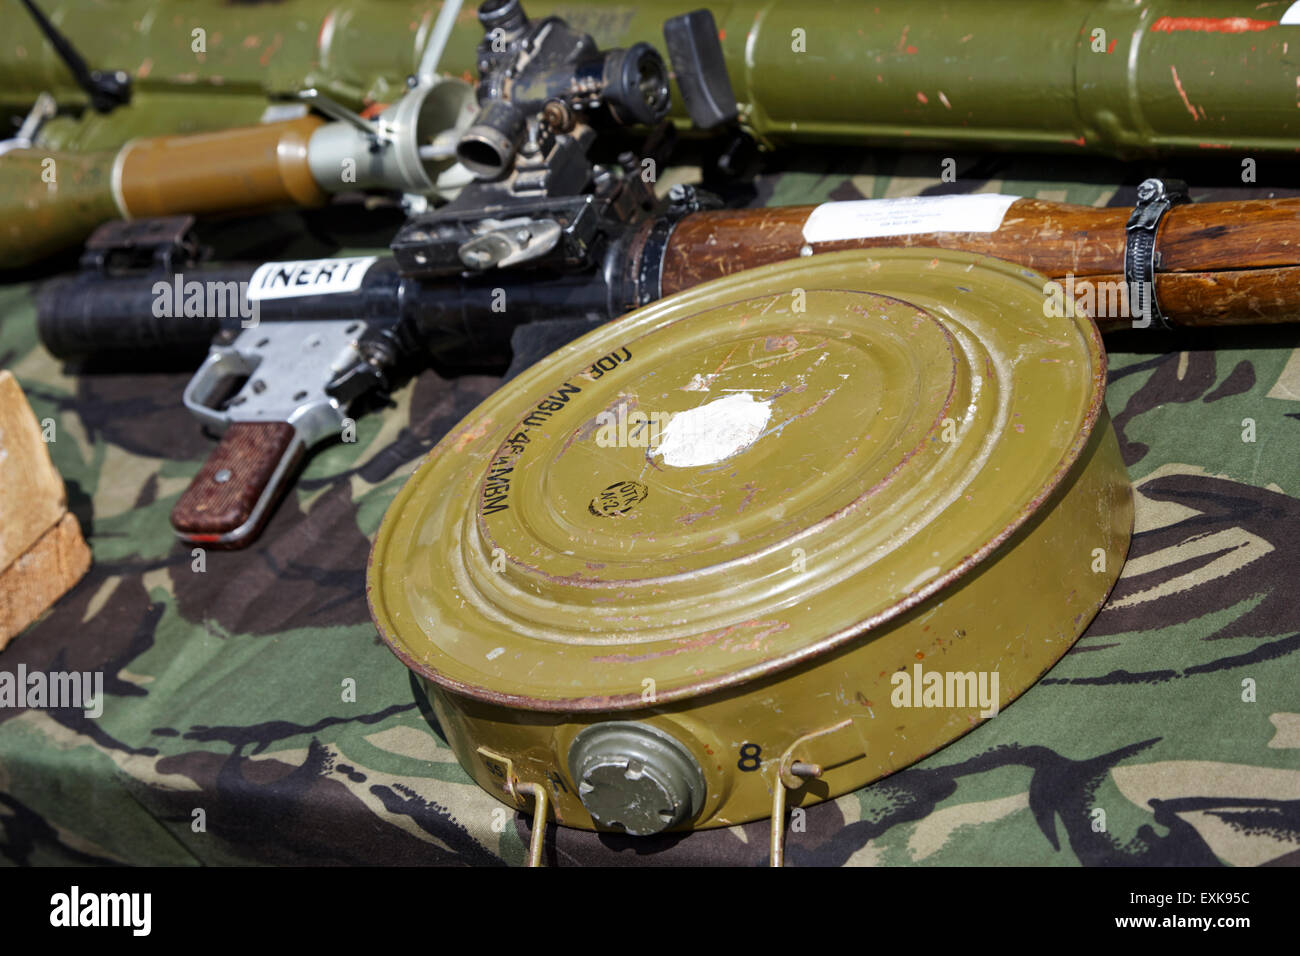 inert tm-46 anti tank mine used for military training purposes recovered from afghanistan Stock Photo